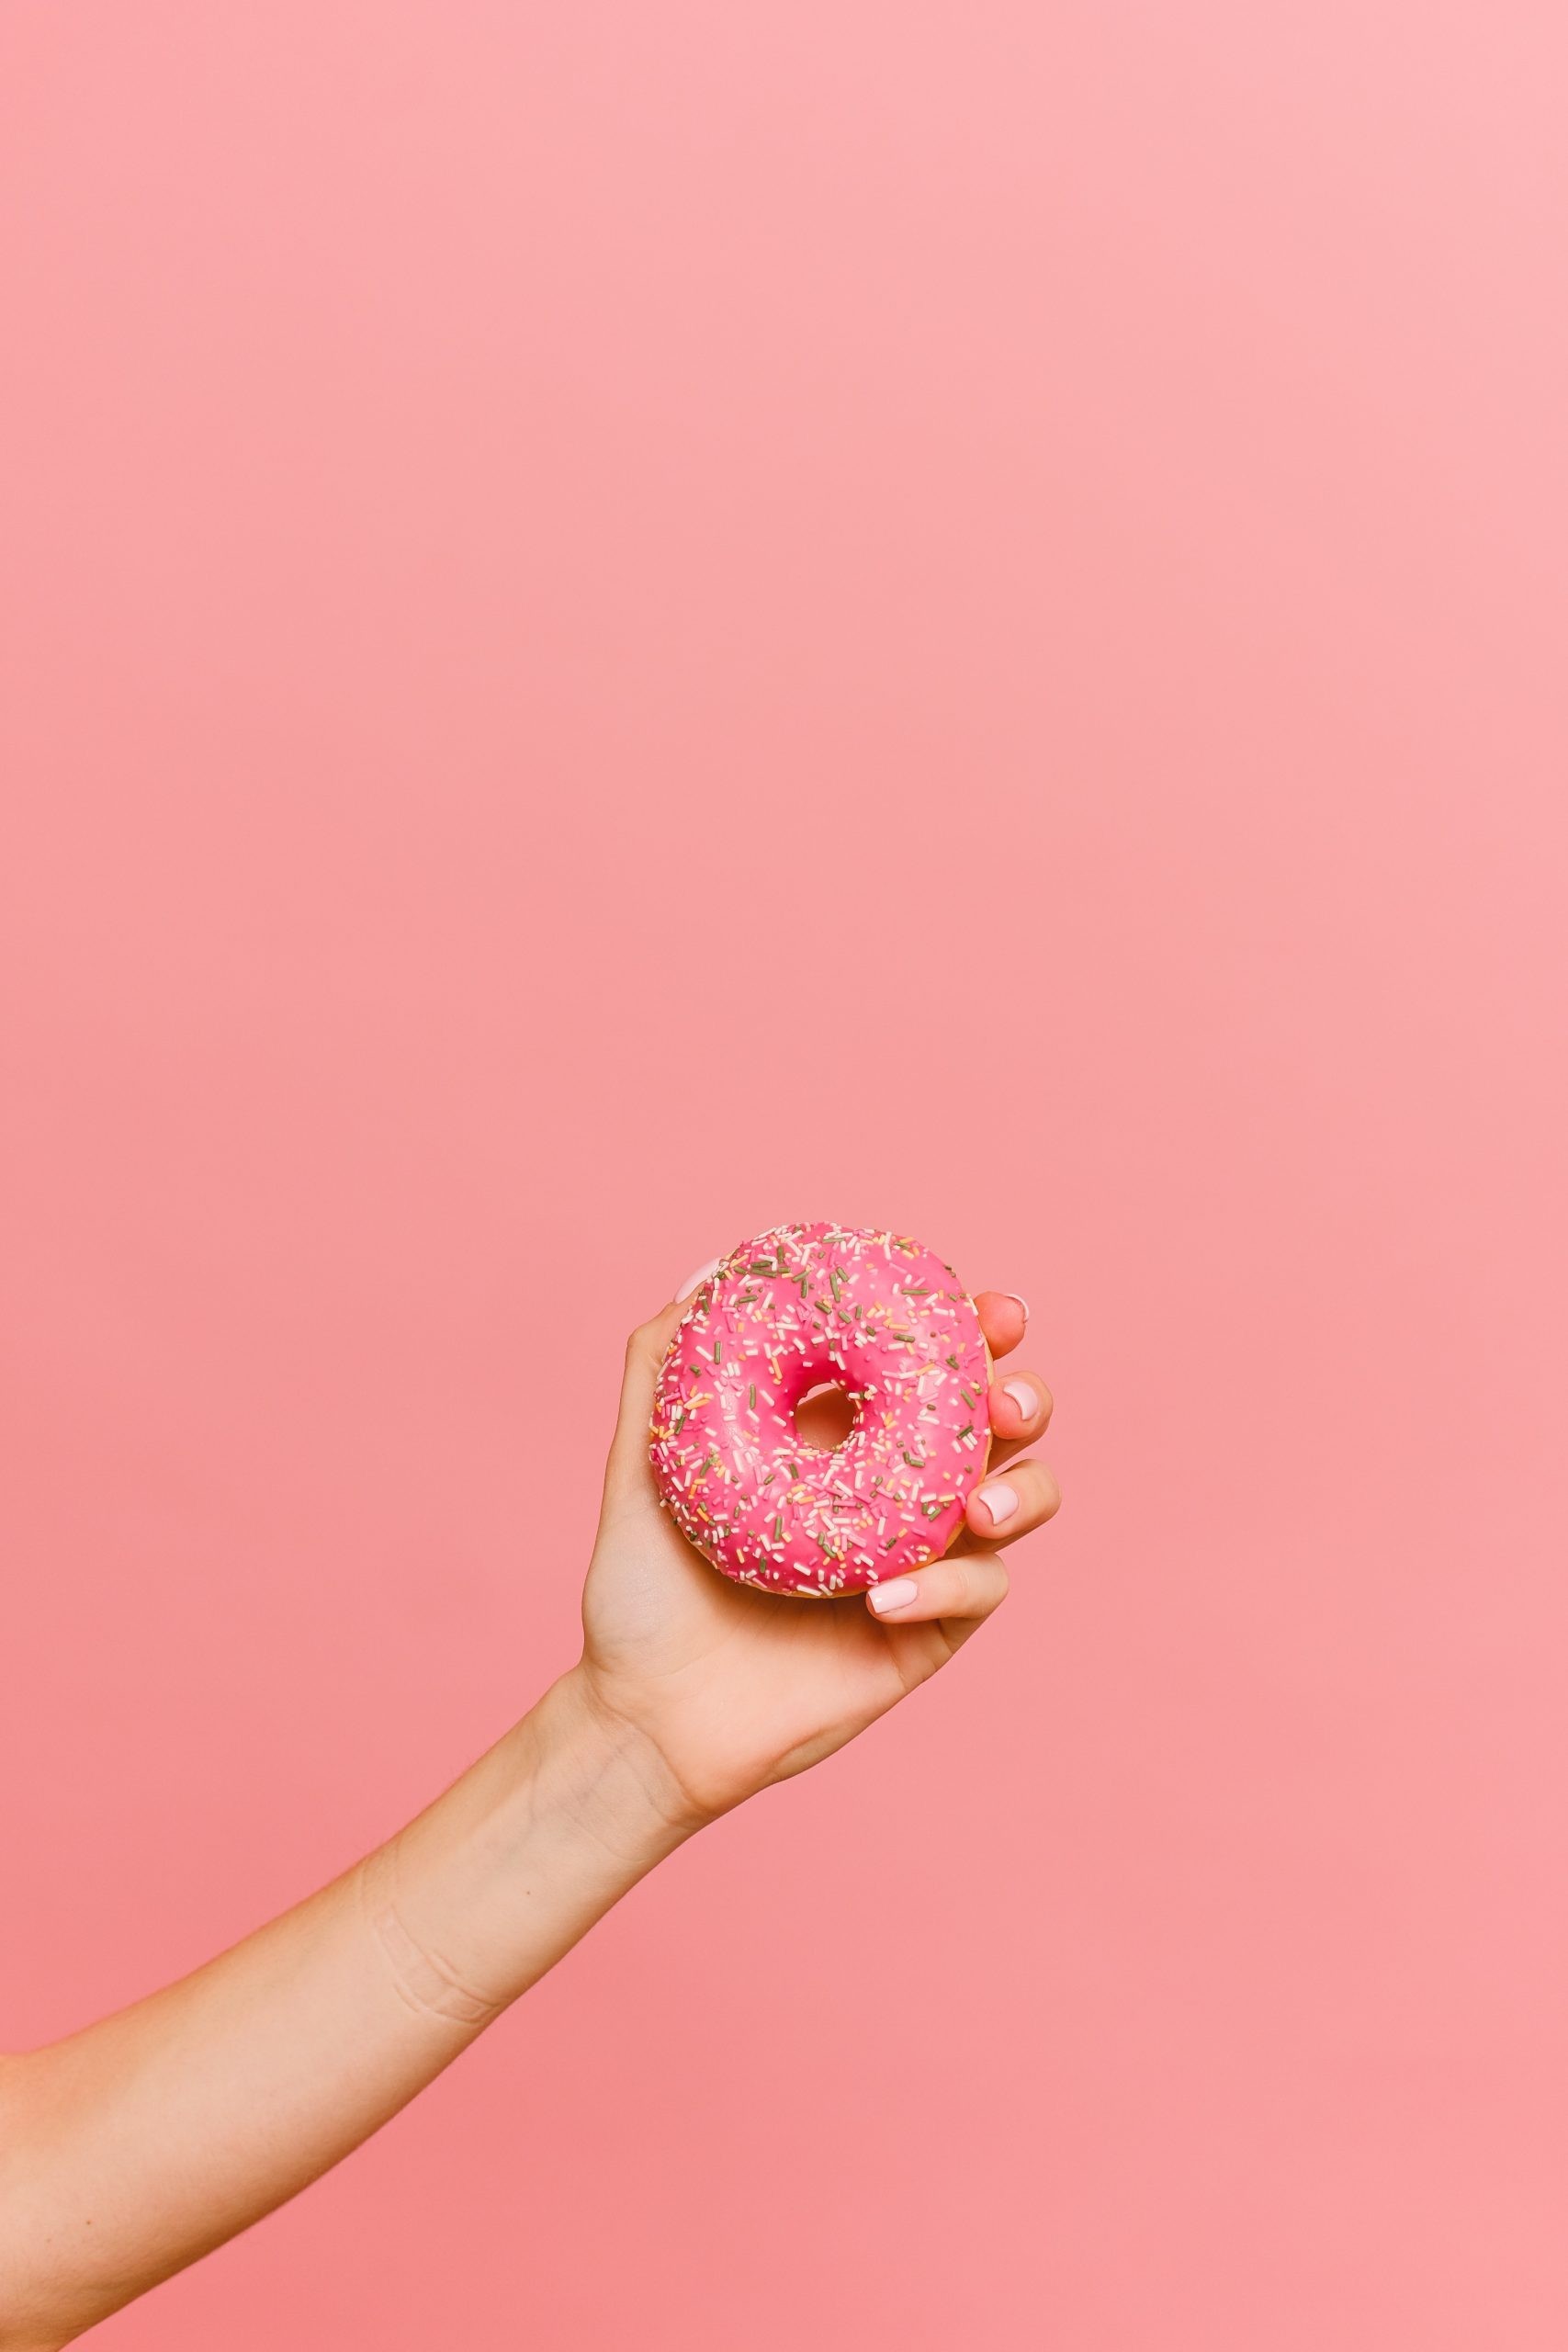 A Person Holding Pink Donut